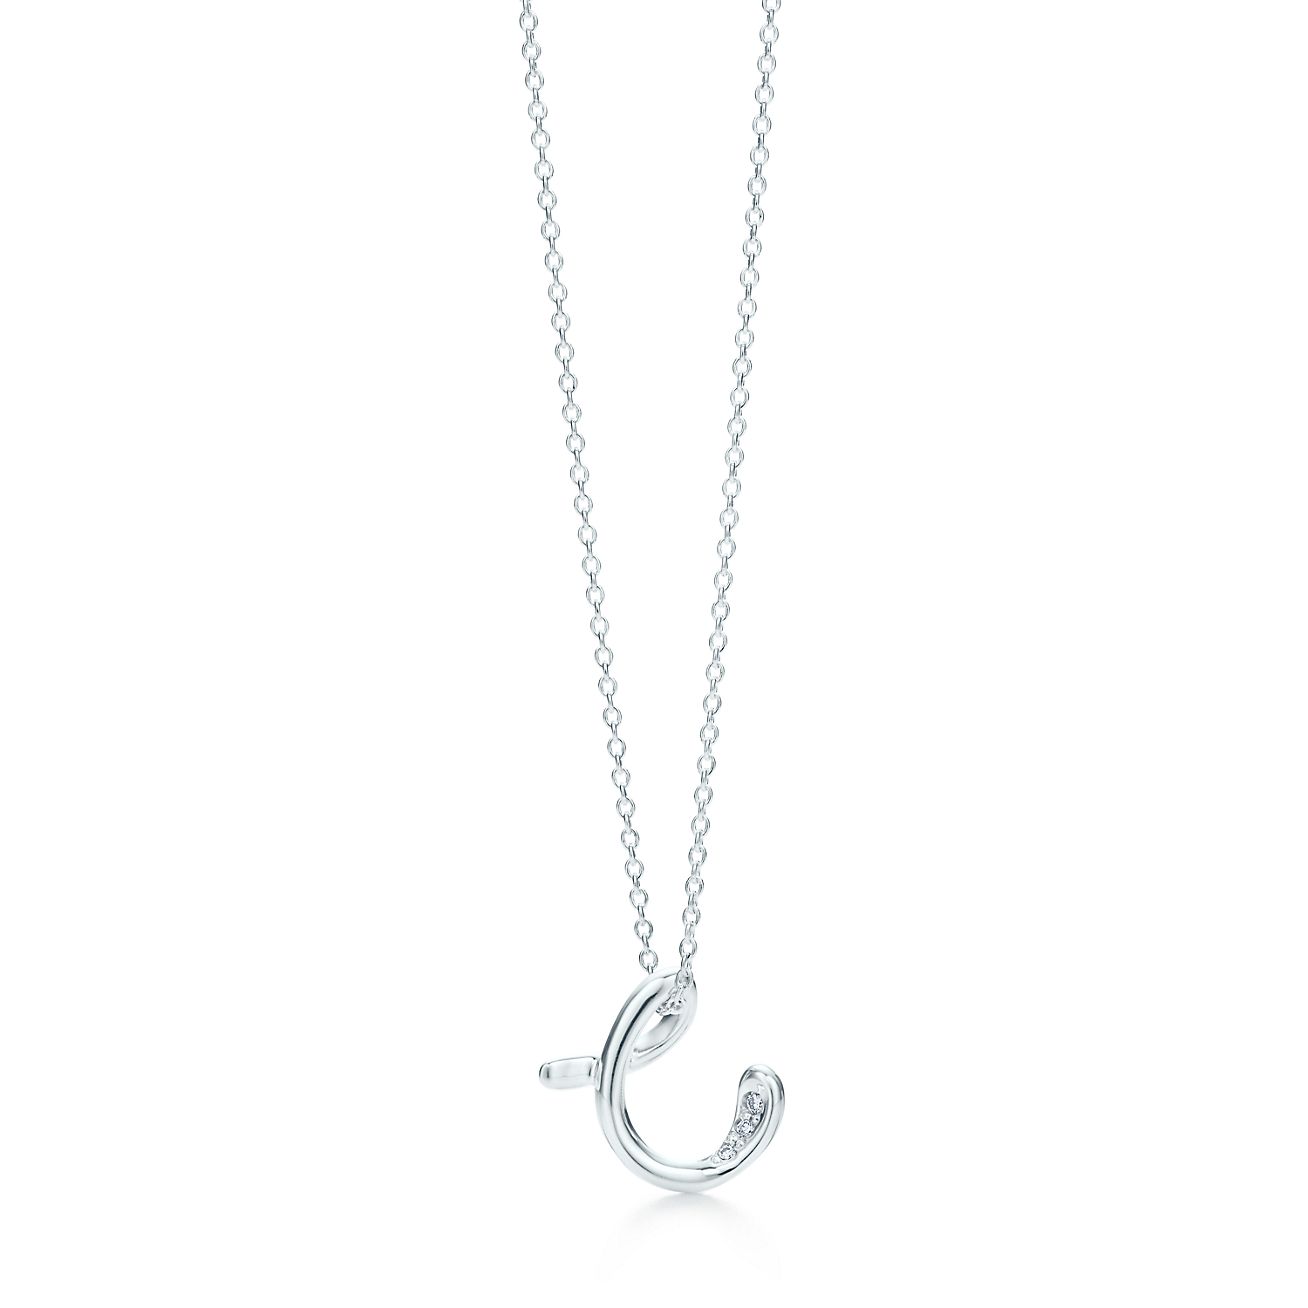 tiffany letter c necklace